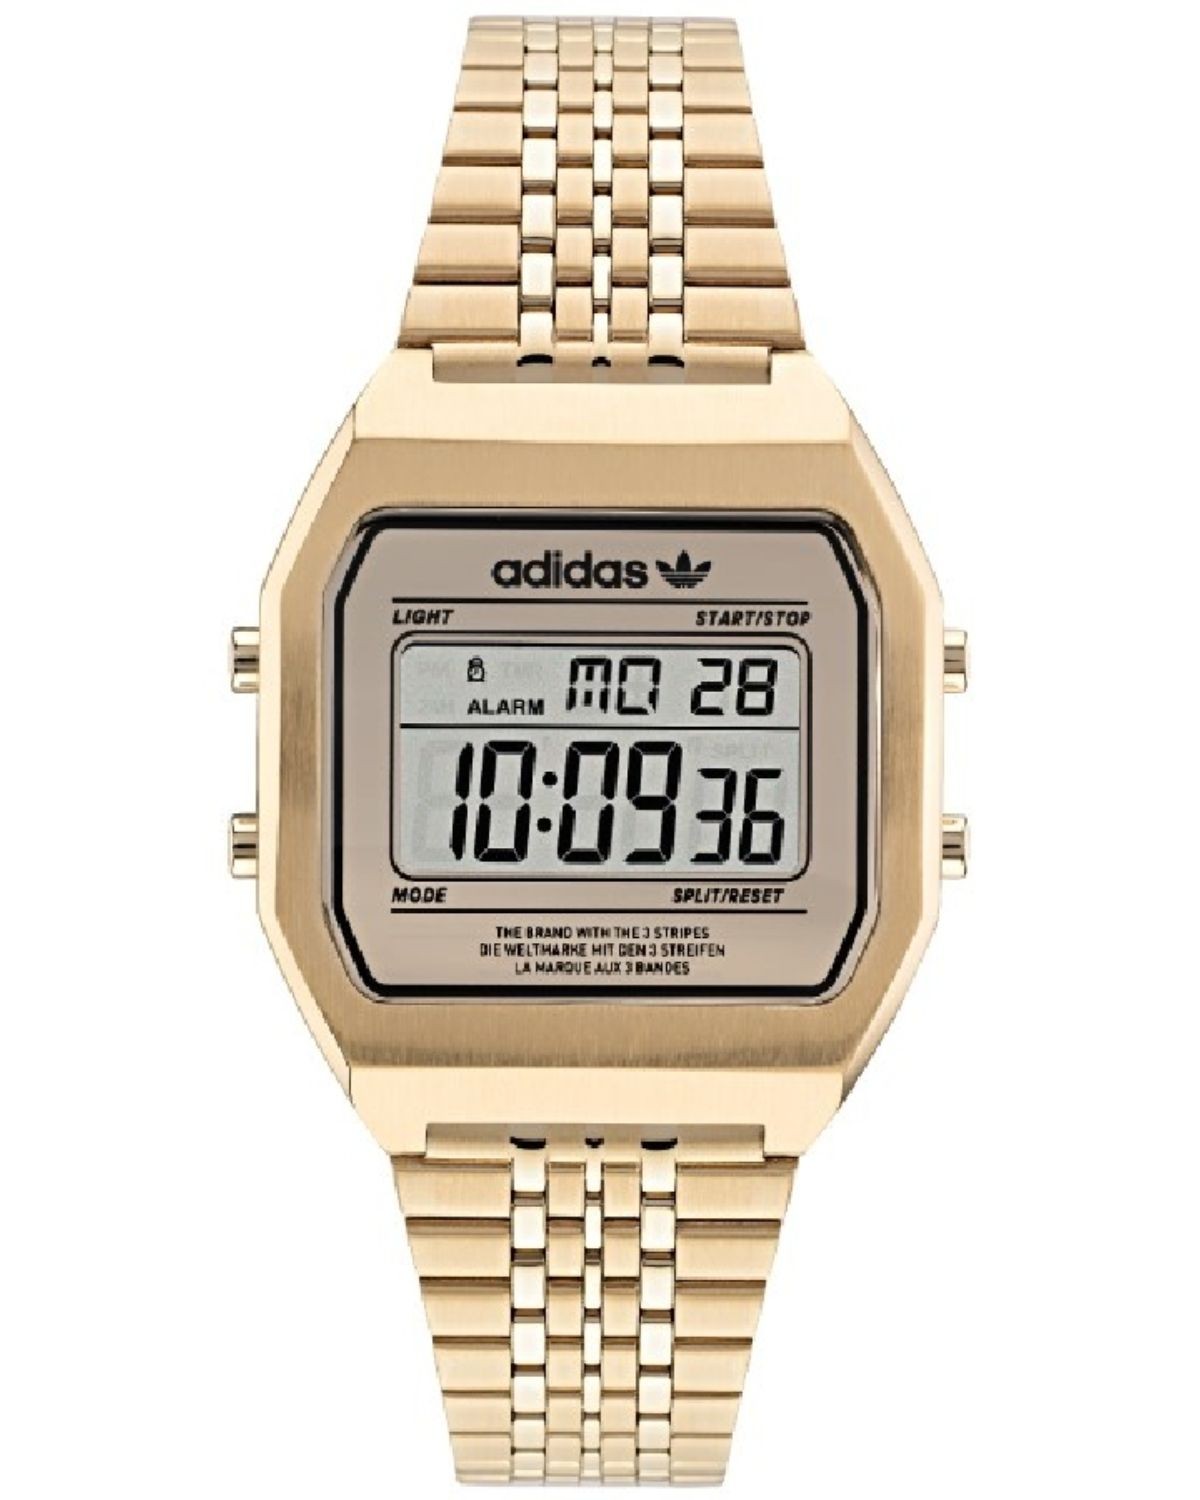 Adidas Originals stainless-steel in AOST22074 online | Adidas Watch gold Digital in Adidas stainless-steel watch watch Digital Clicktime.eu» | men\'s gold Barato Two Men\'s Watch Comprar Two Comprar men\'s